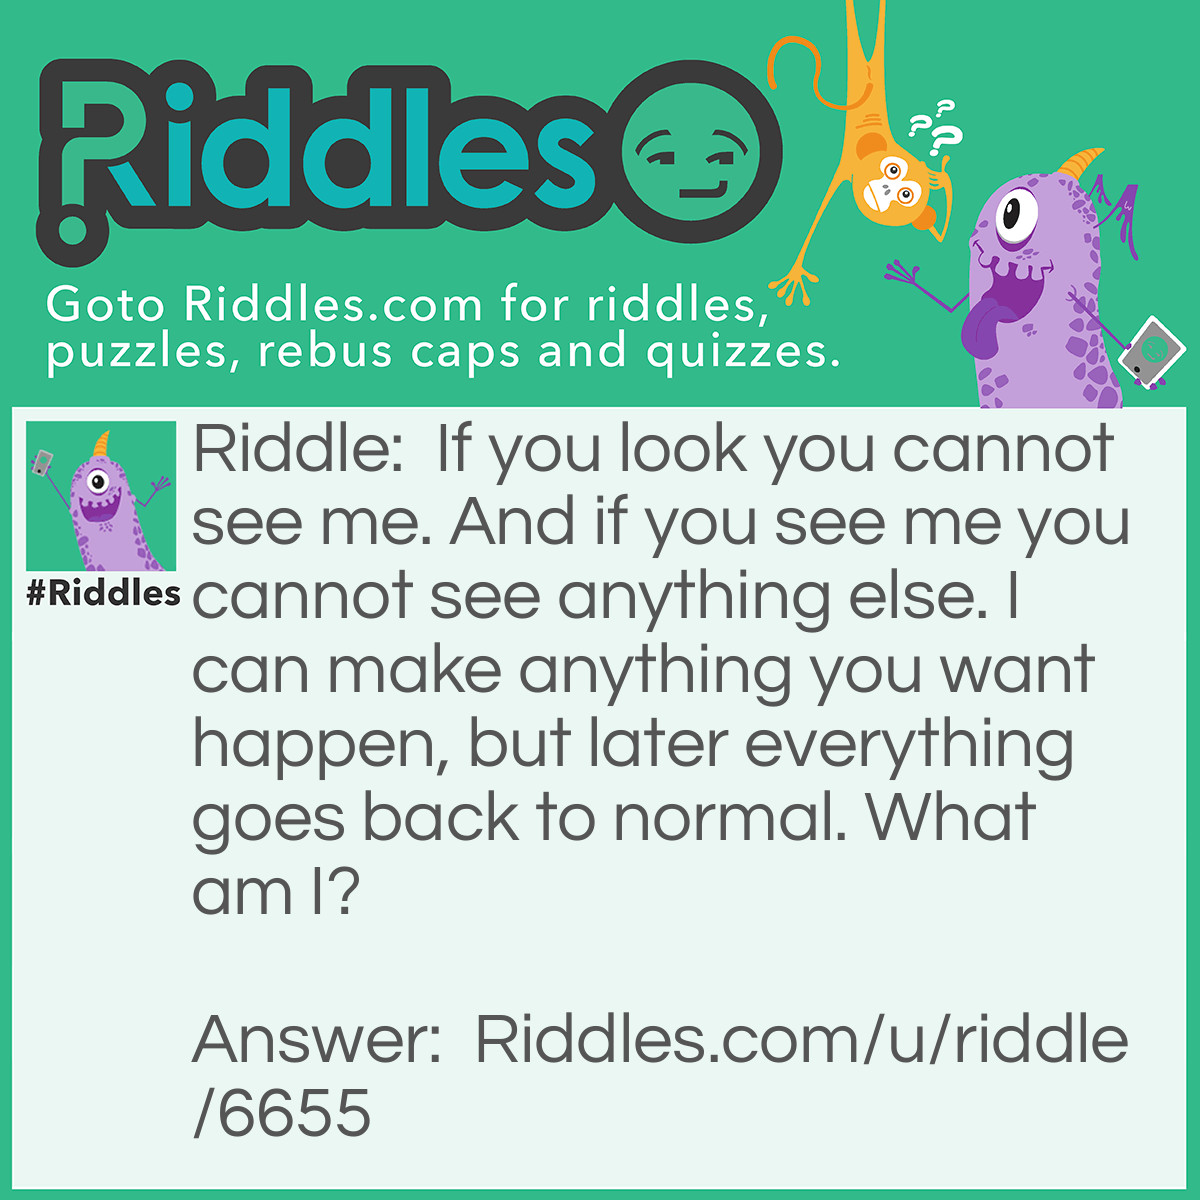 Riddle: If you look you cannot see me. And if you see me you cannot see anything else. I can make anything you want happen, but later everything goes back to normal. What am I? Answer: Your imagination.